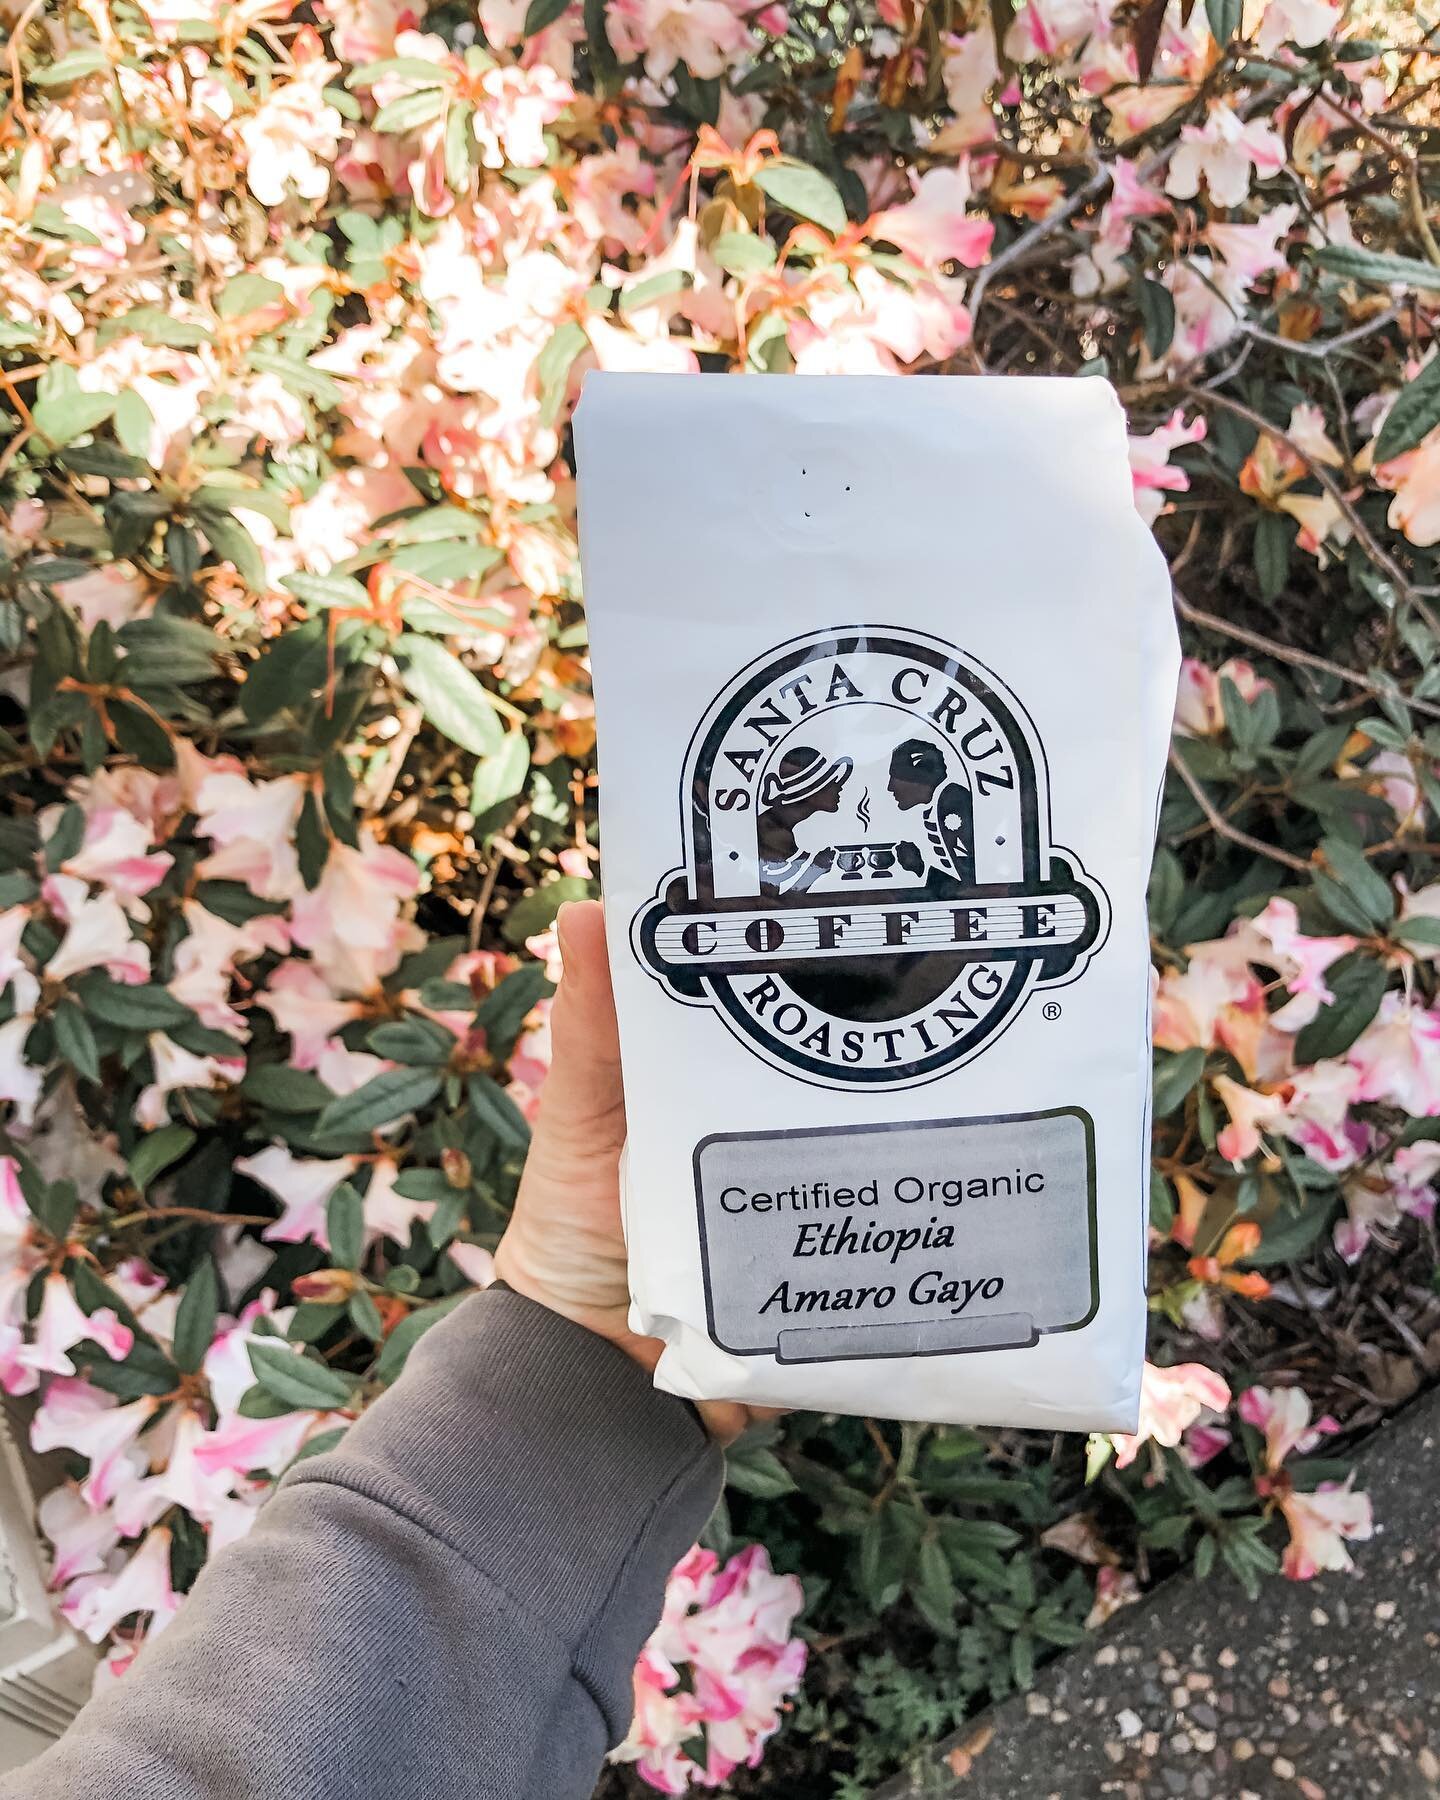 In honor of Women&rsquo;s History Month we are so excited to be serving Santa Cruz Coffee&rsquo;s Ethiopian Amaro Gayo light roast Coffee.  With fruit forward flavors of blackberry and blueberry,  and complex acidity this delicious light roast coffee